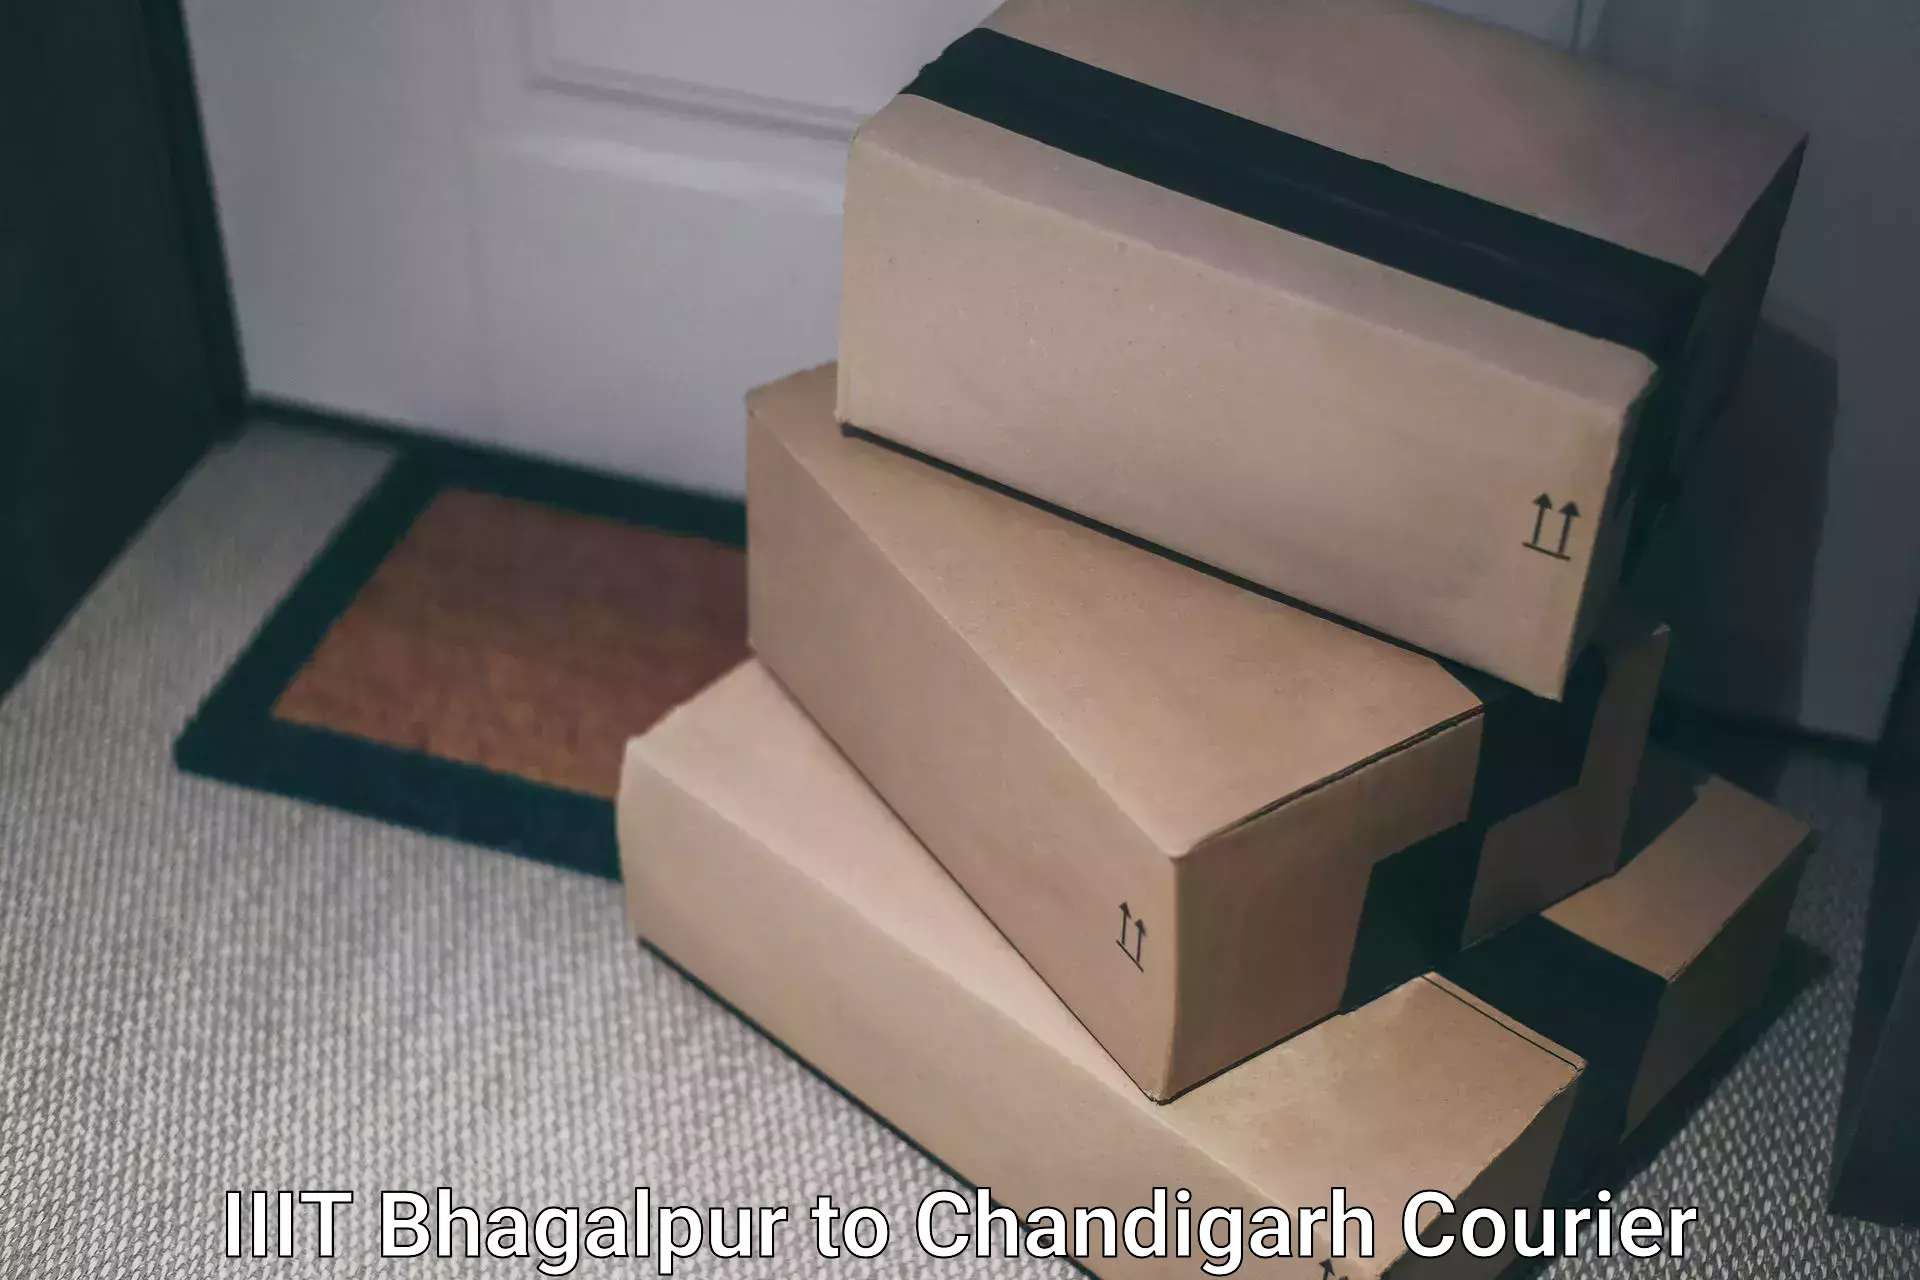 Express package services IIIT Bhagalpur to Panjab University Chandigarh